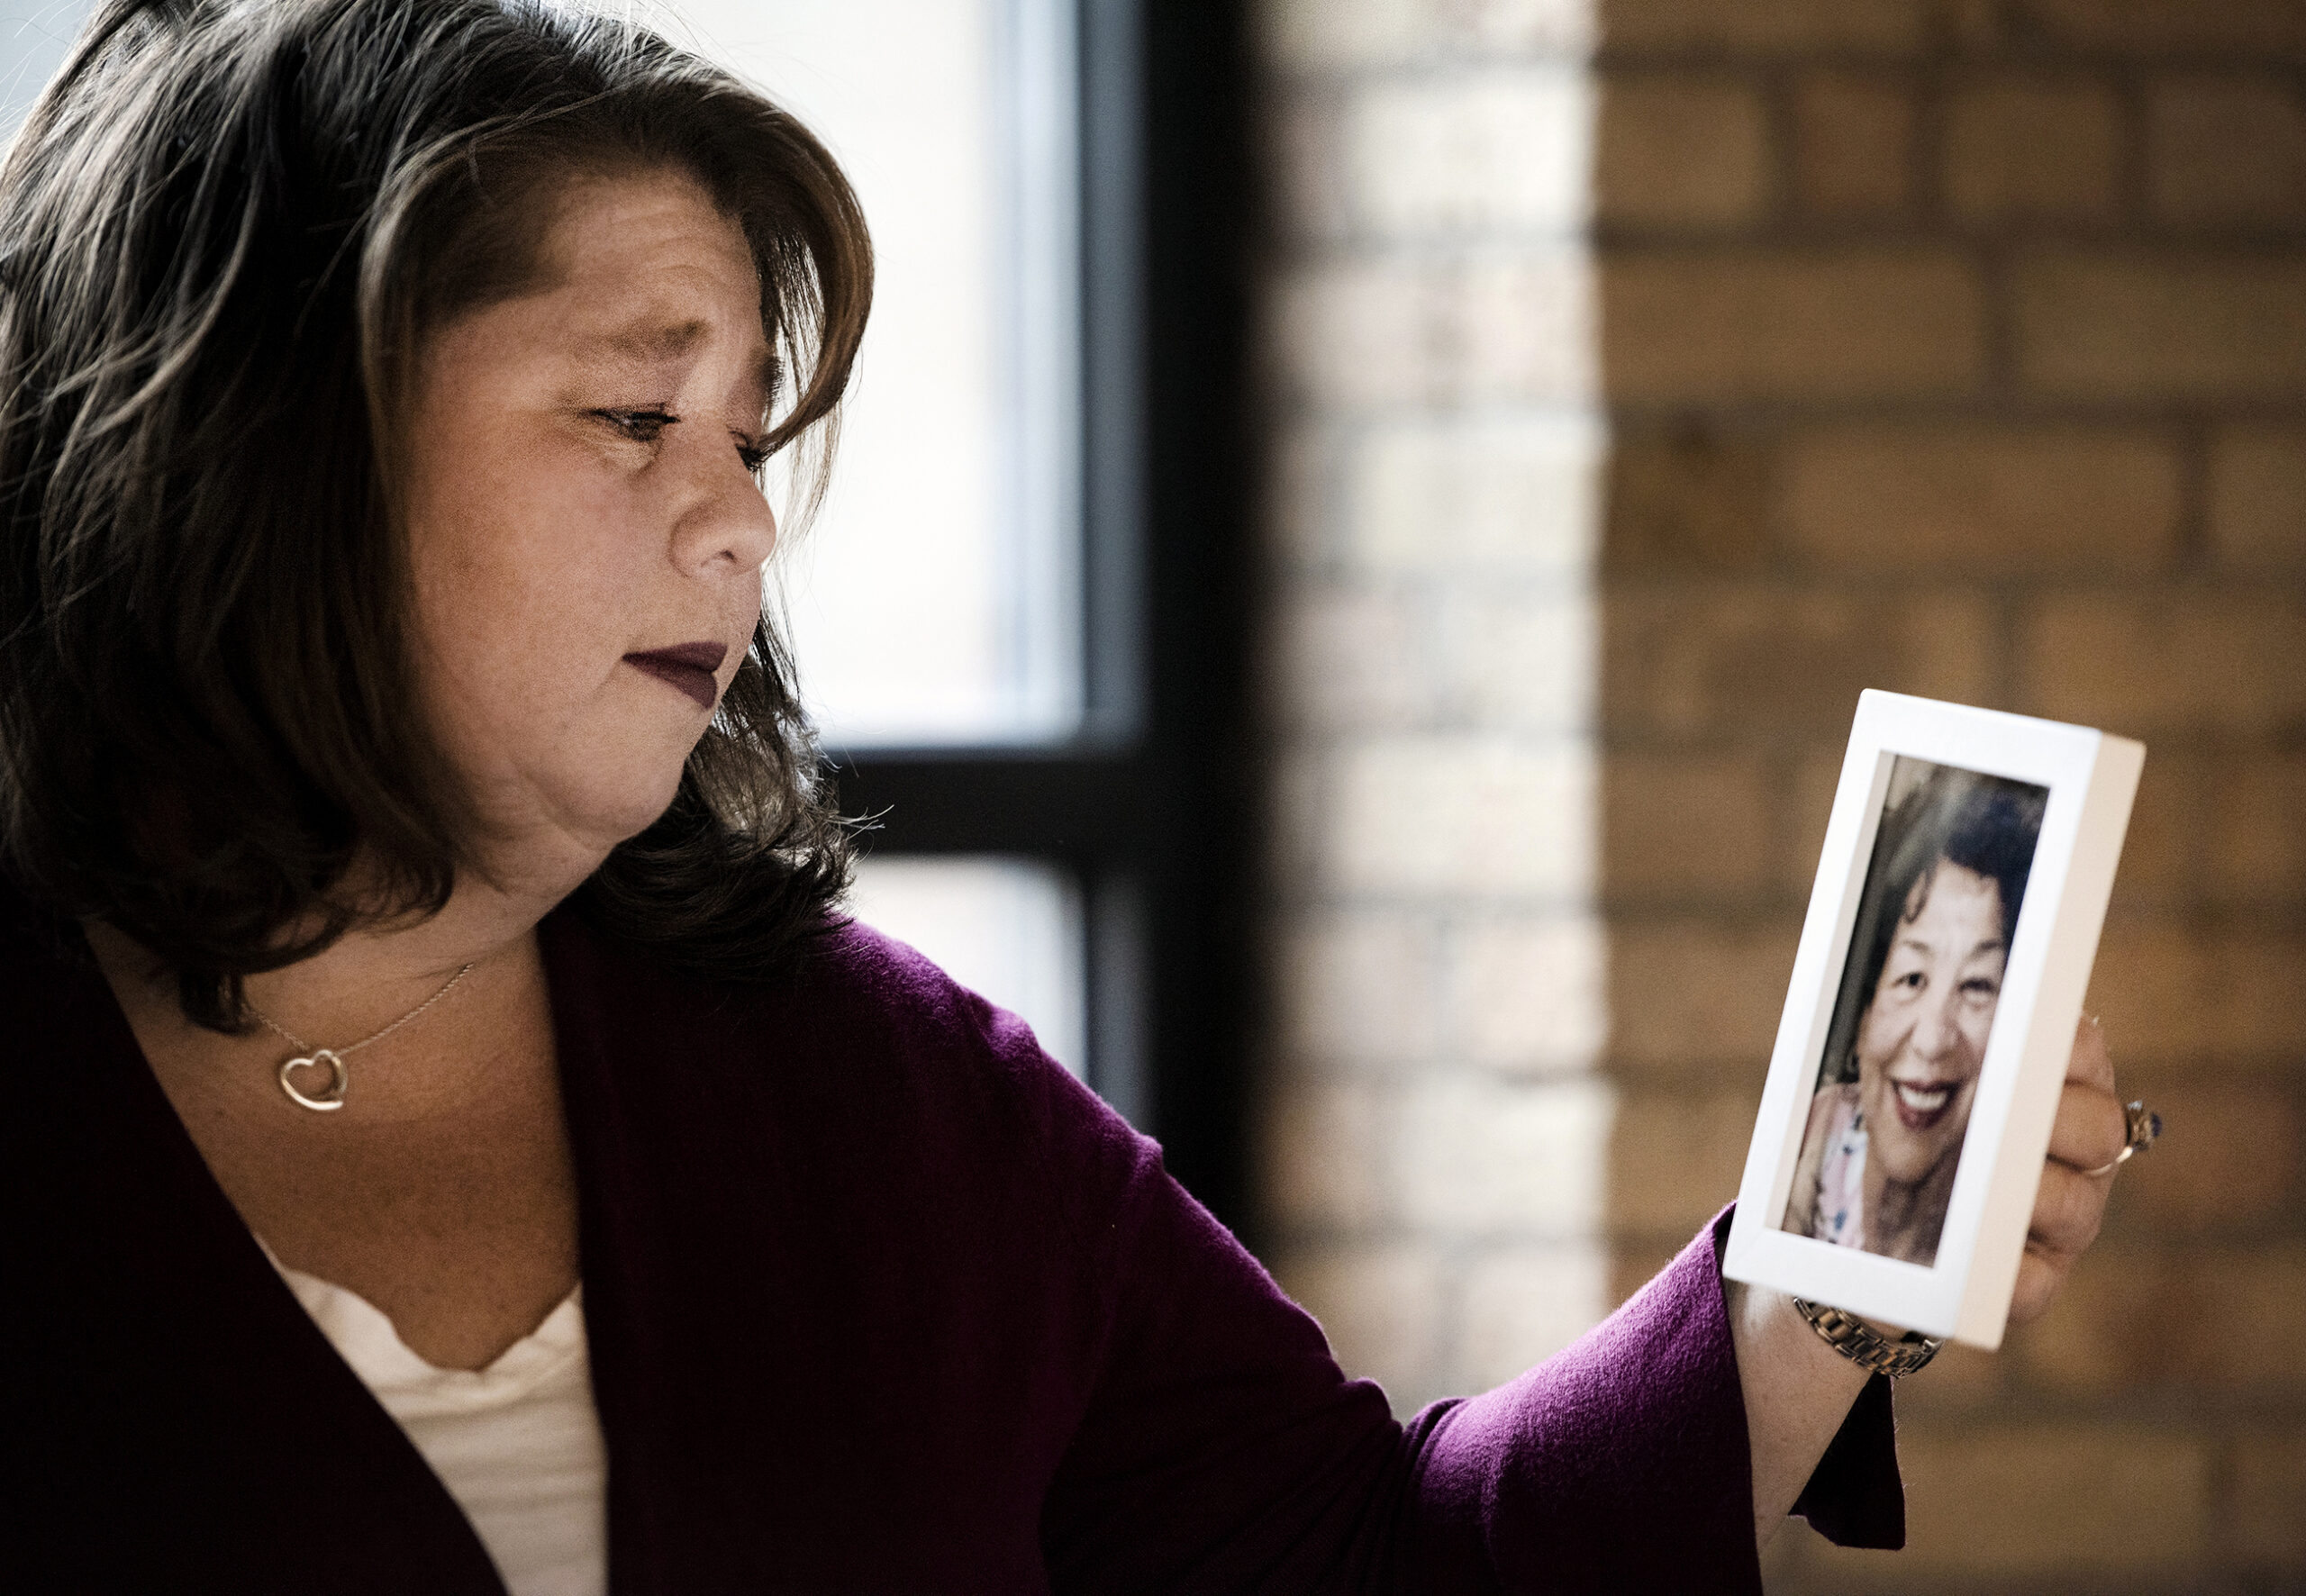 A woman looks at a photo in her hand showing her mother